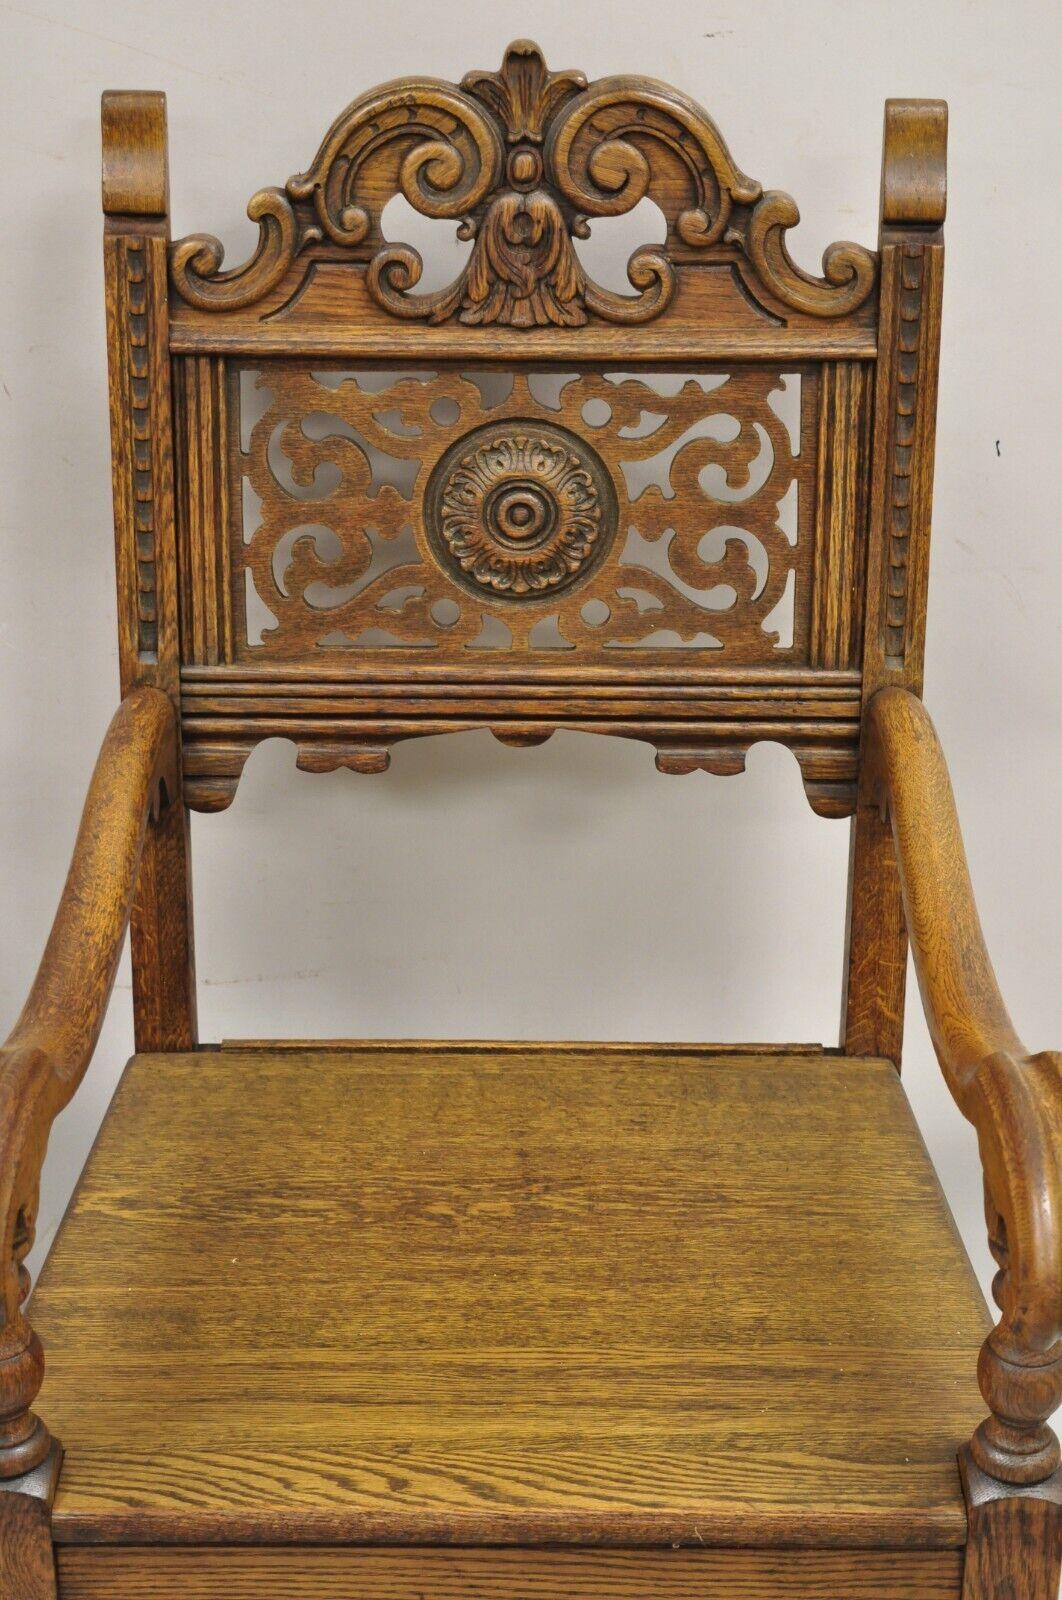 Early 20th Century Antique Vanleigh Carved Oak Italian Renaissance Style Throne Arm Chairs - a Pair For Sale